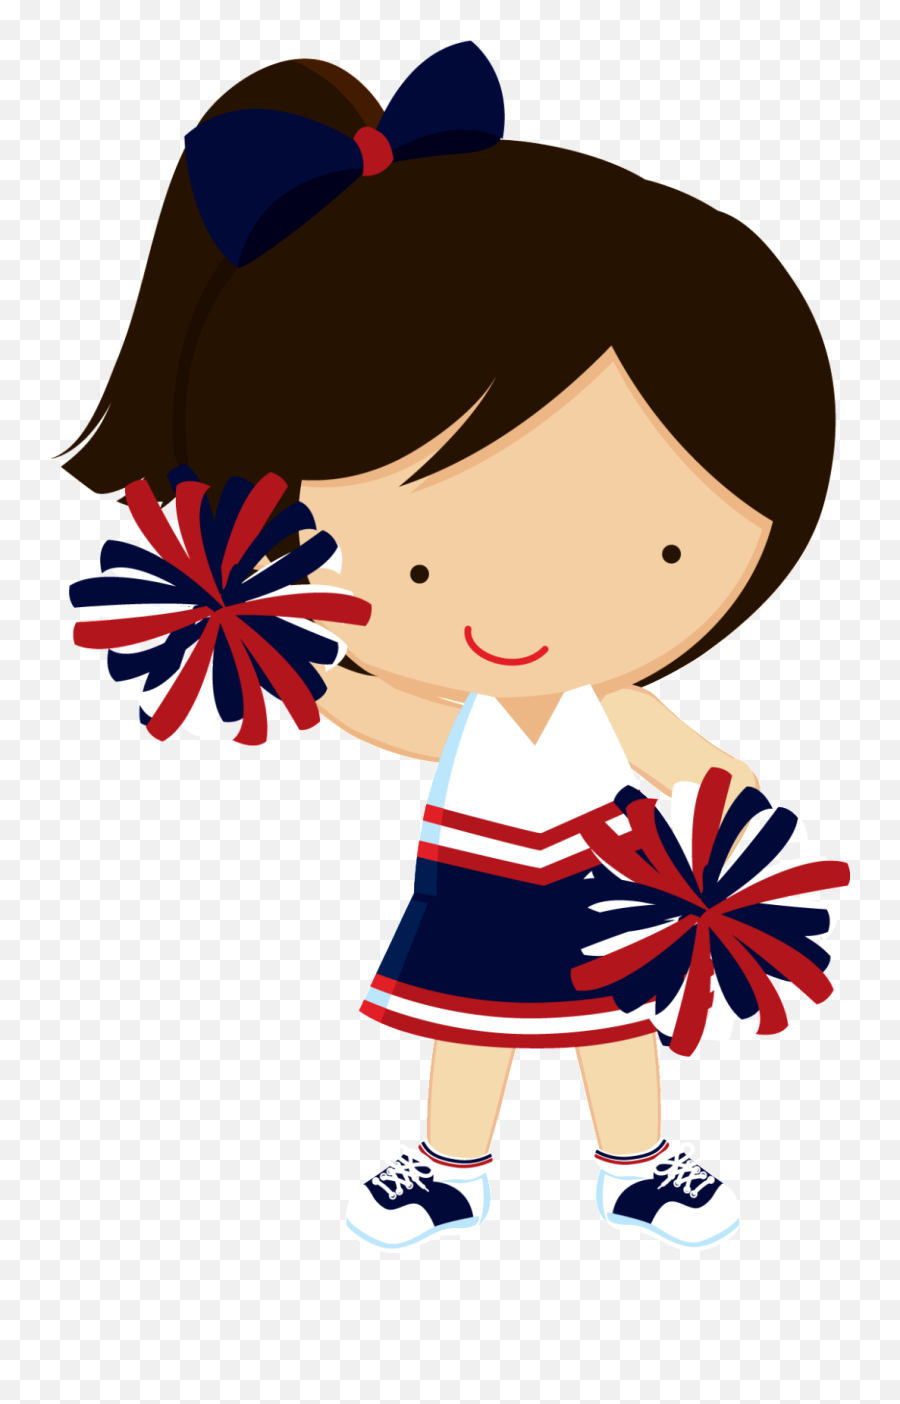 Minus - Baby Cheerleader Clipart 1054x1599 Png Clipart Lider De Torcida Png Emoji,Cheerleader Clipart